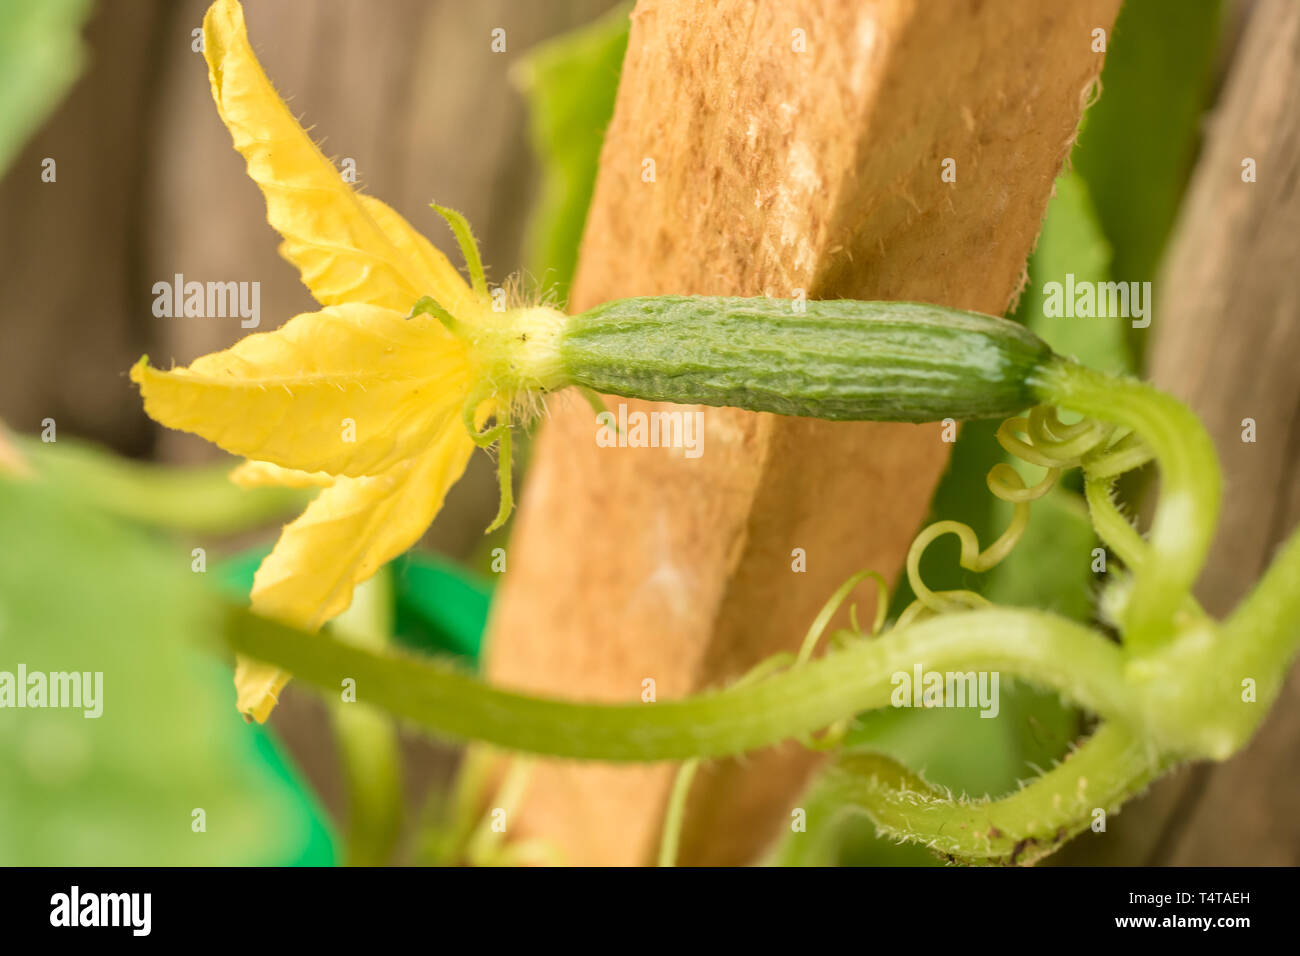 Young fruit of a cucumber in a detailed shot Stock Photo